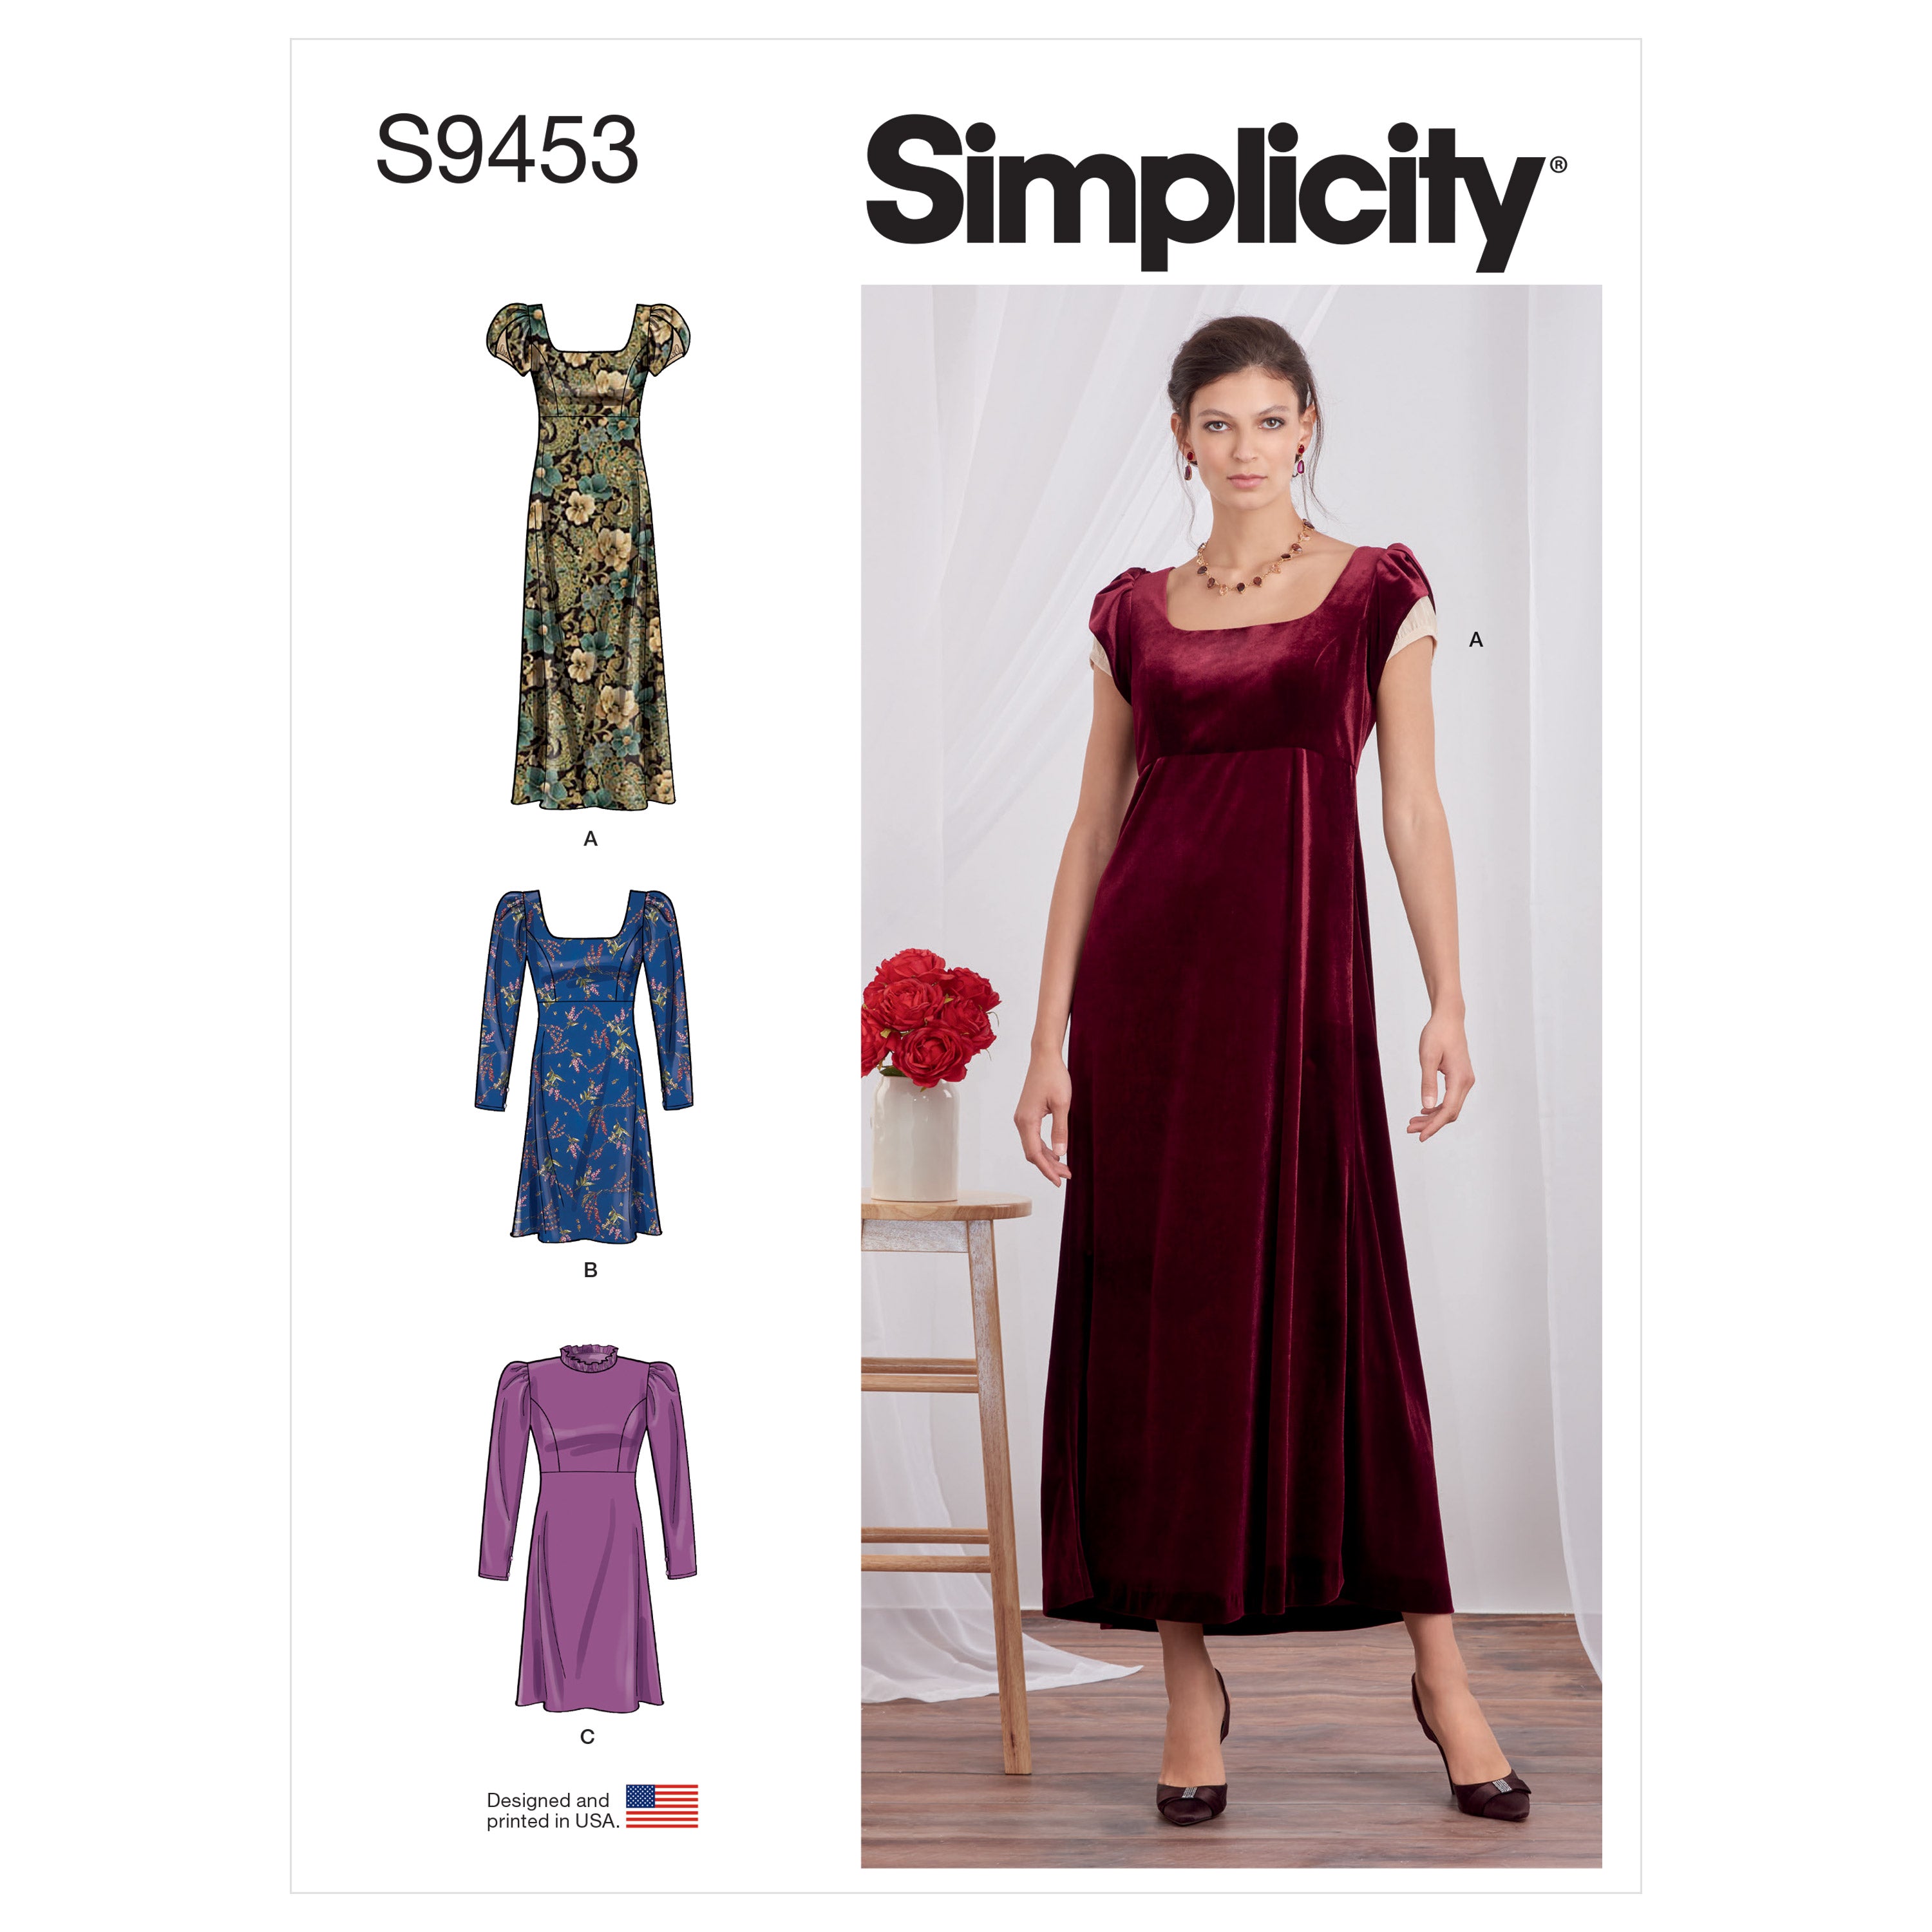 Simplicity Sewing Pattern 9453 Misses' Dress from Jaycotts Sewing Supplies